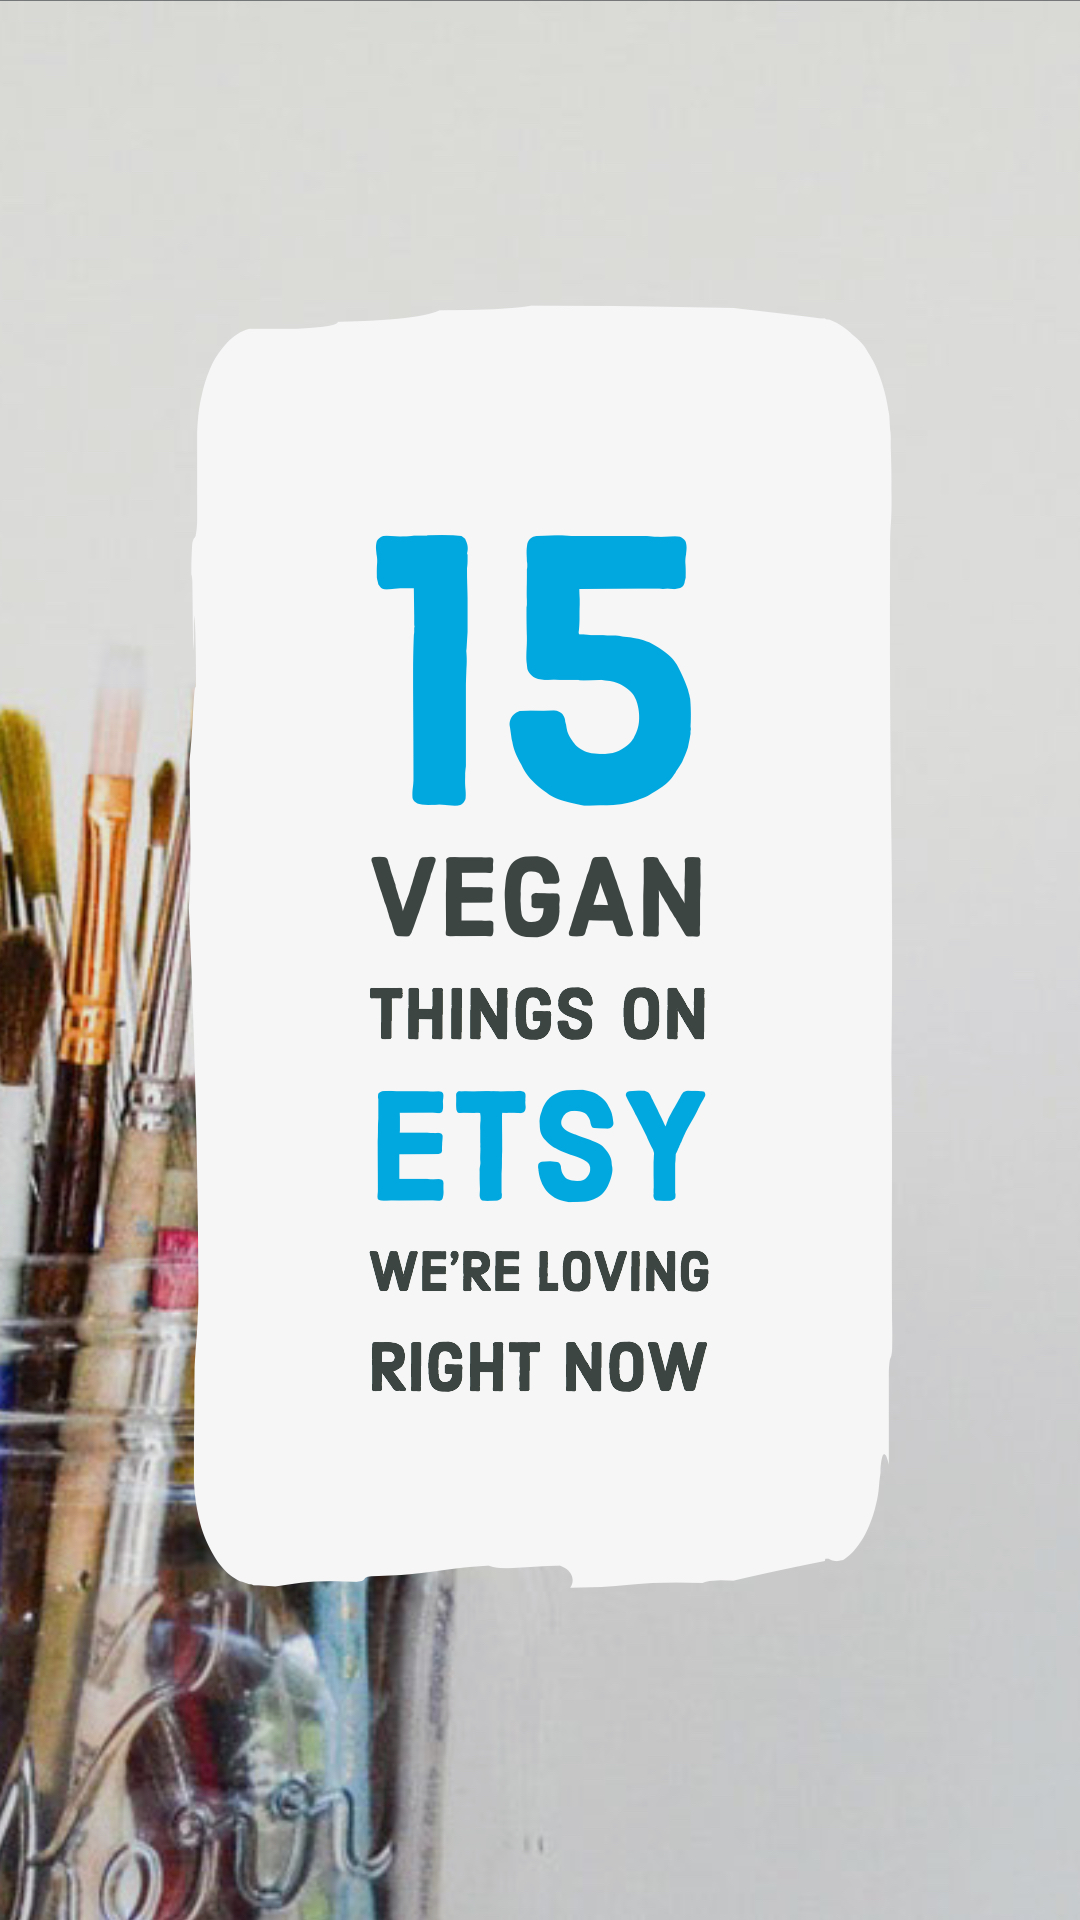 15 Vegan Things on Etsy We’re Loving Right Now